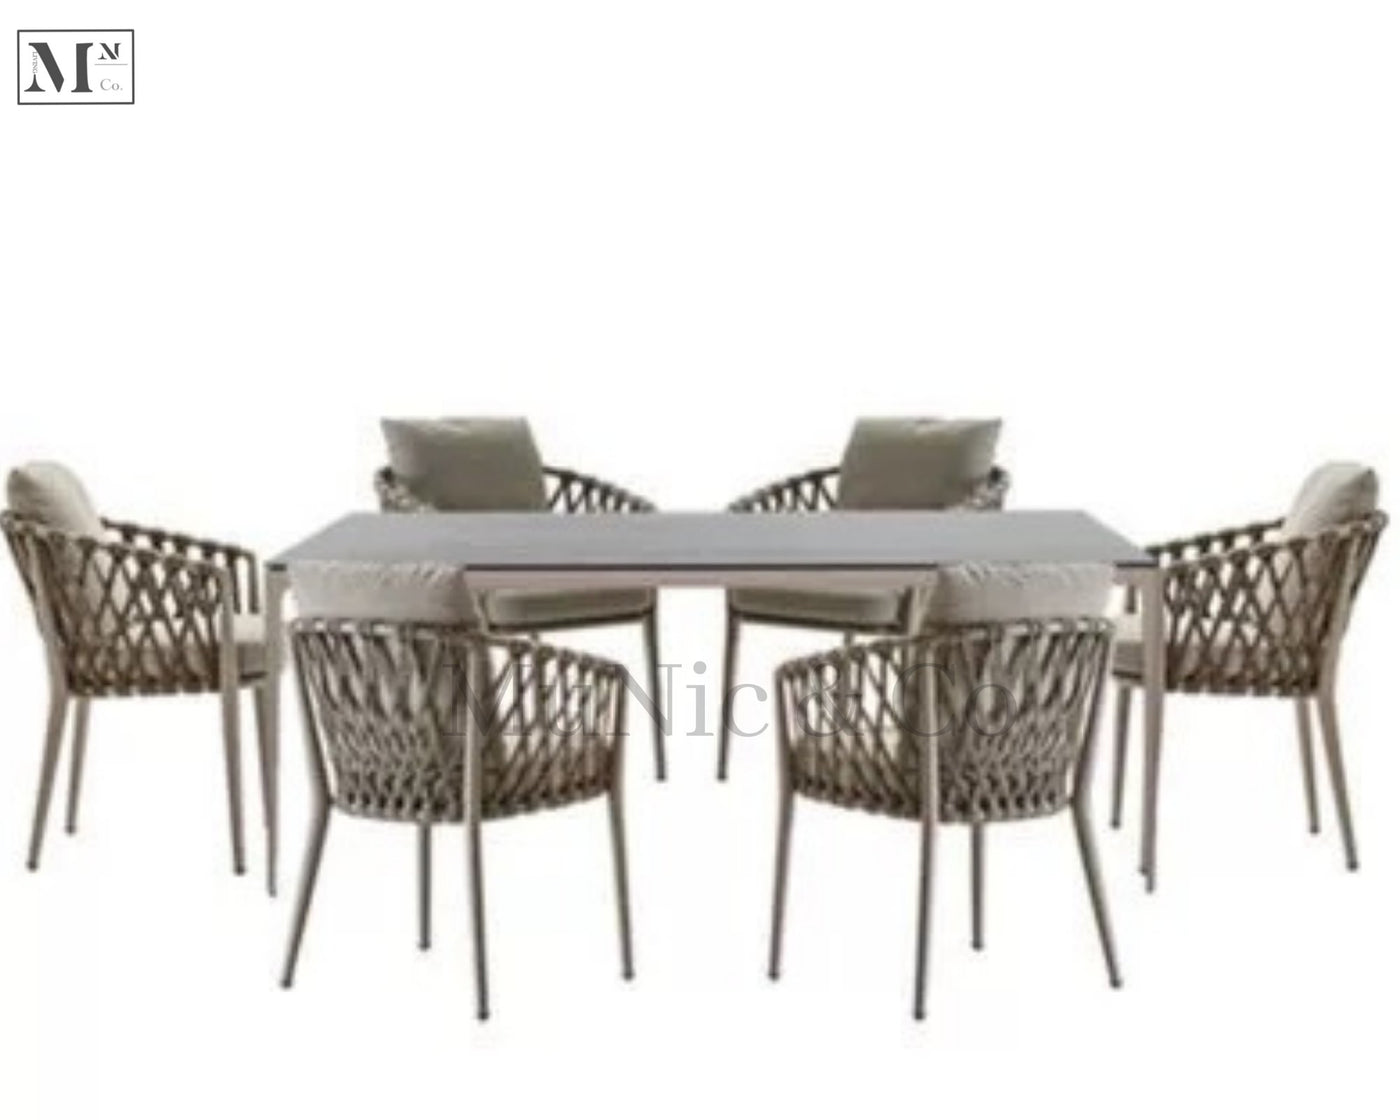 kelly chair in rope weave.  dining chair